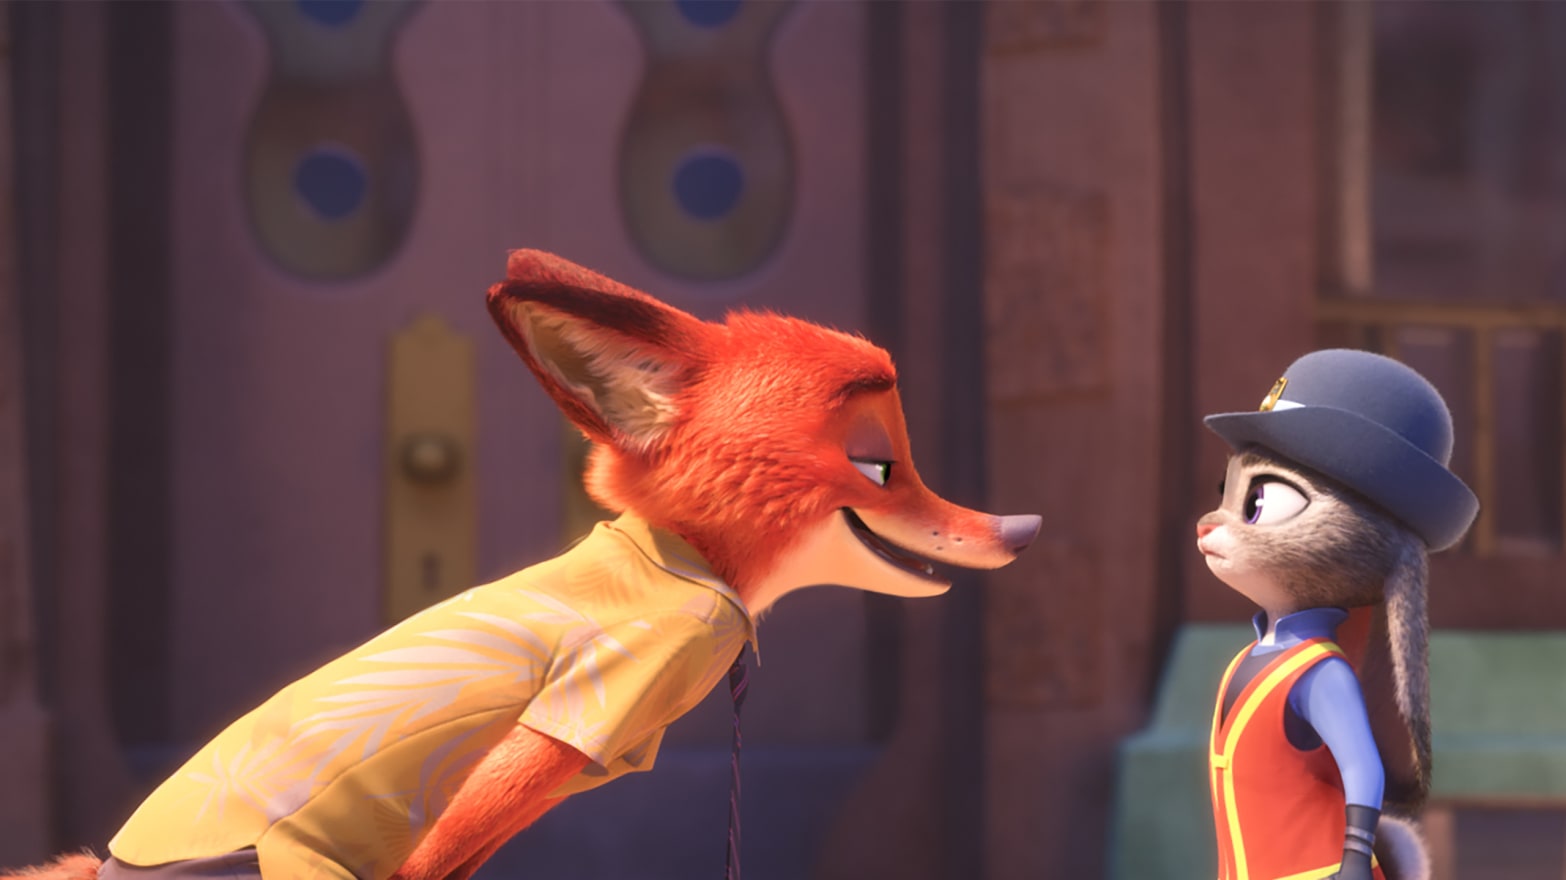 Zootopia 2 Now Moving Forward 7 Years After Blockbuster Original